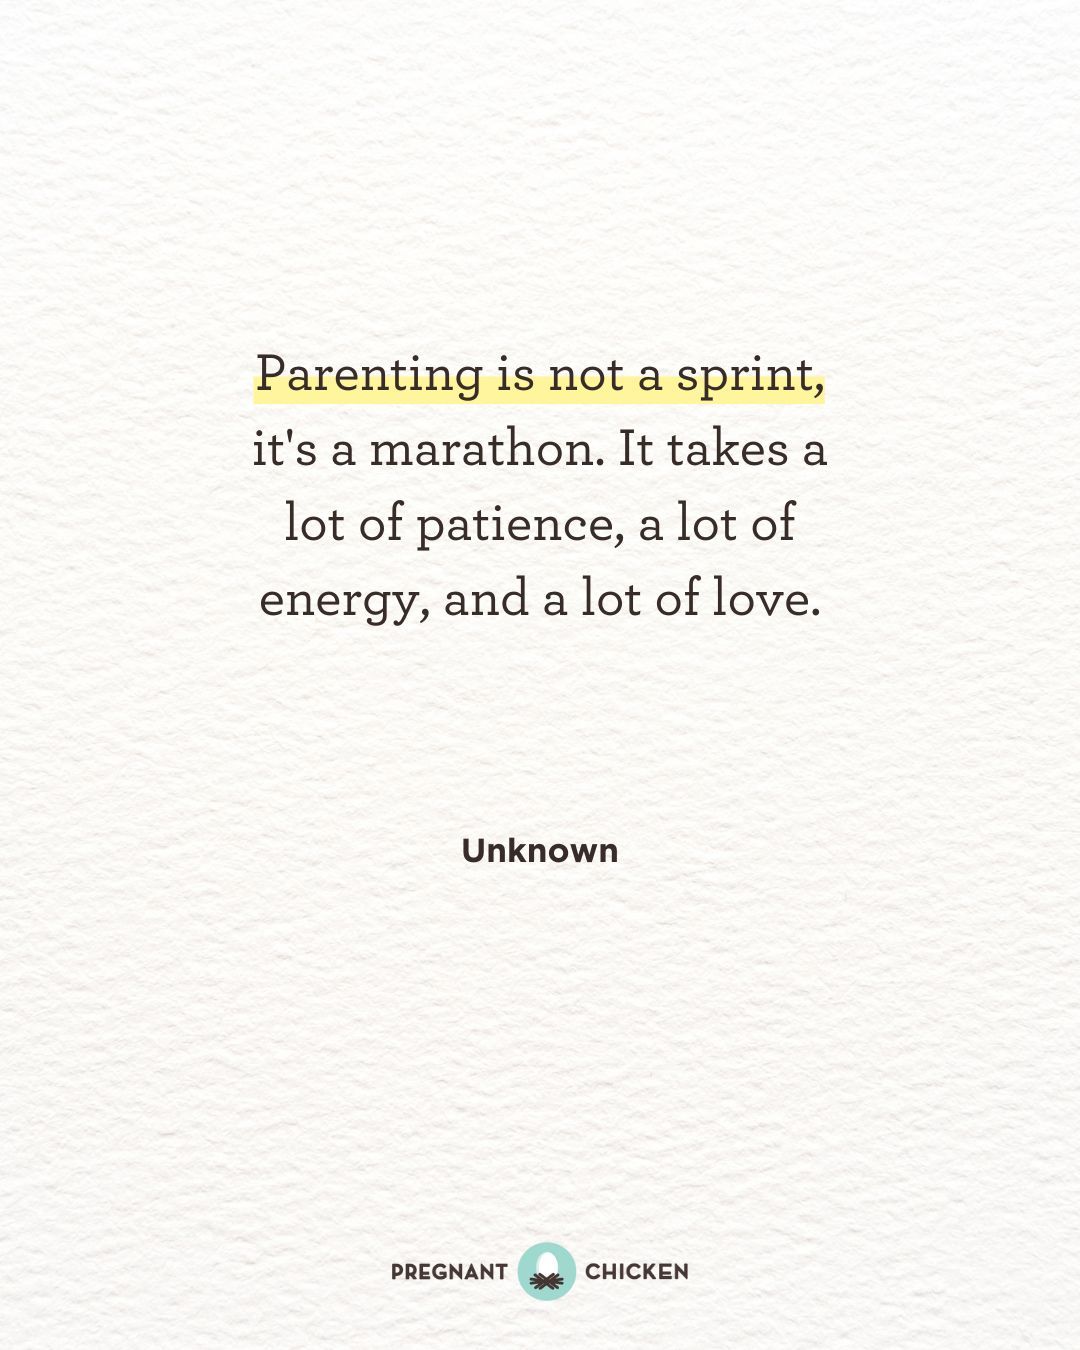 Parenting is not a sprint, it's a marathon. It takes a lot of patience, a lot of energy, and a lot of love.